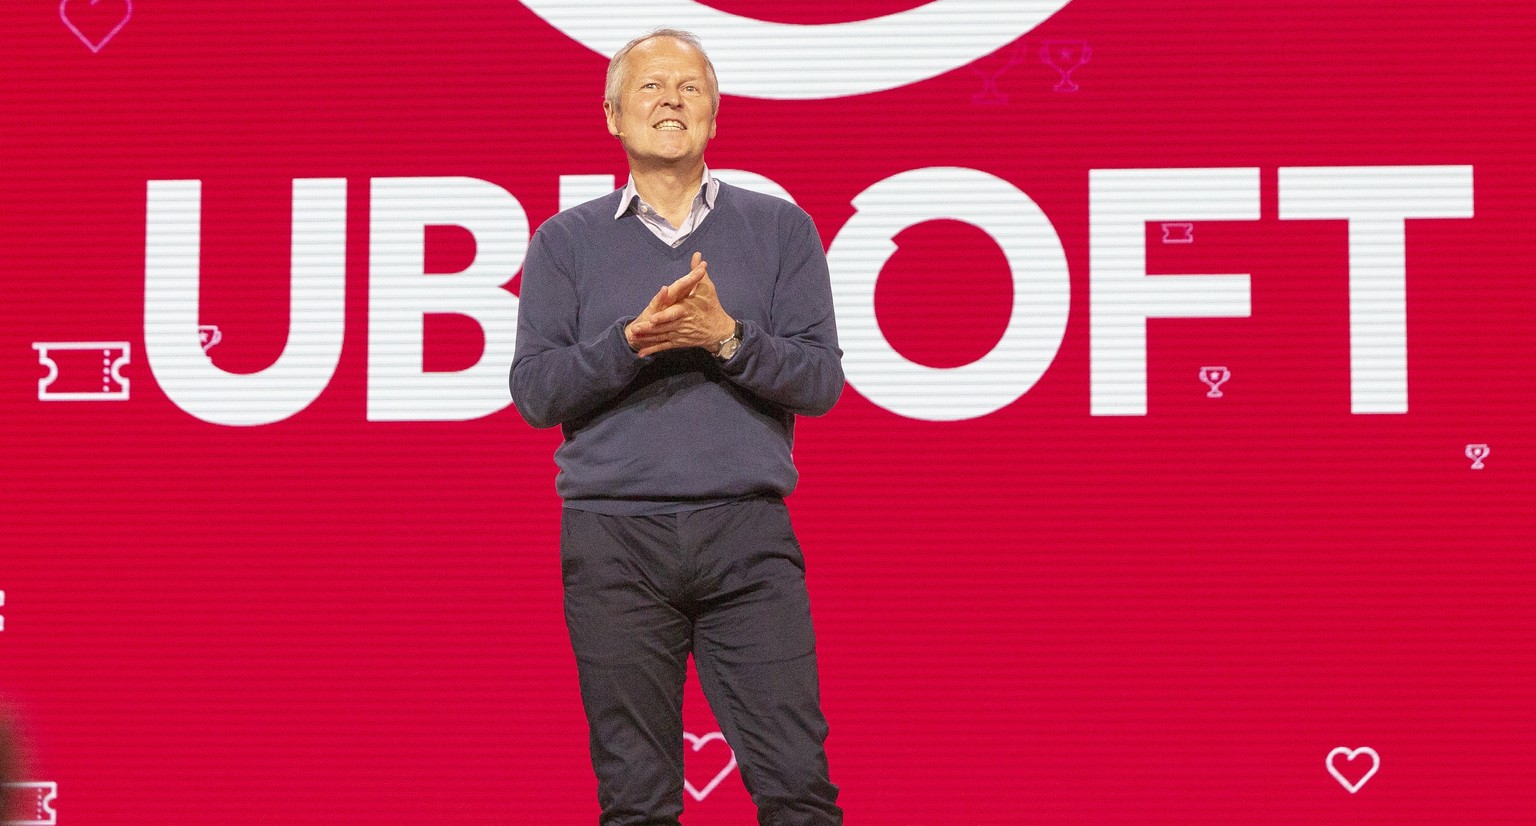 epa07639857 Ubisoft Co-founder and CEO Yves Guillemot speaks during the Ubisoft press conference at the at the Orpheum Theatre in Los Angeles, California, USA, 10 June 2019. This event takes place pri ...